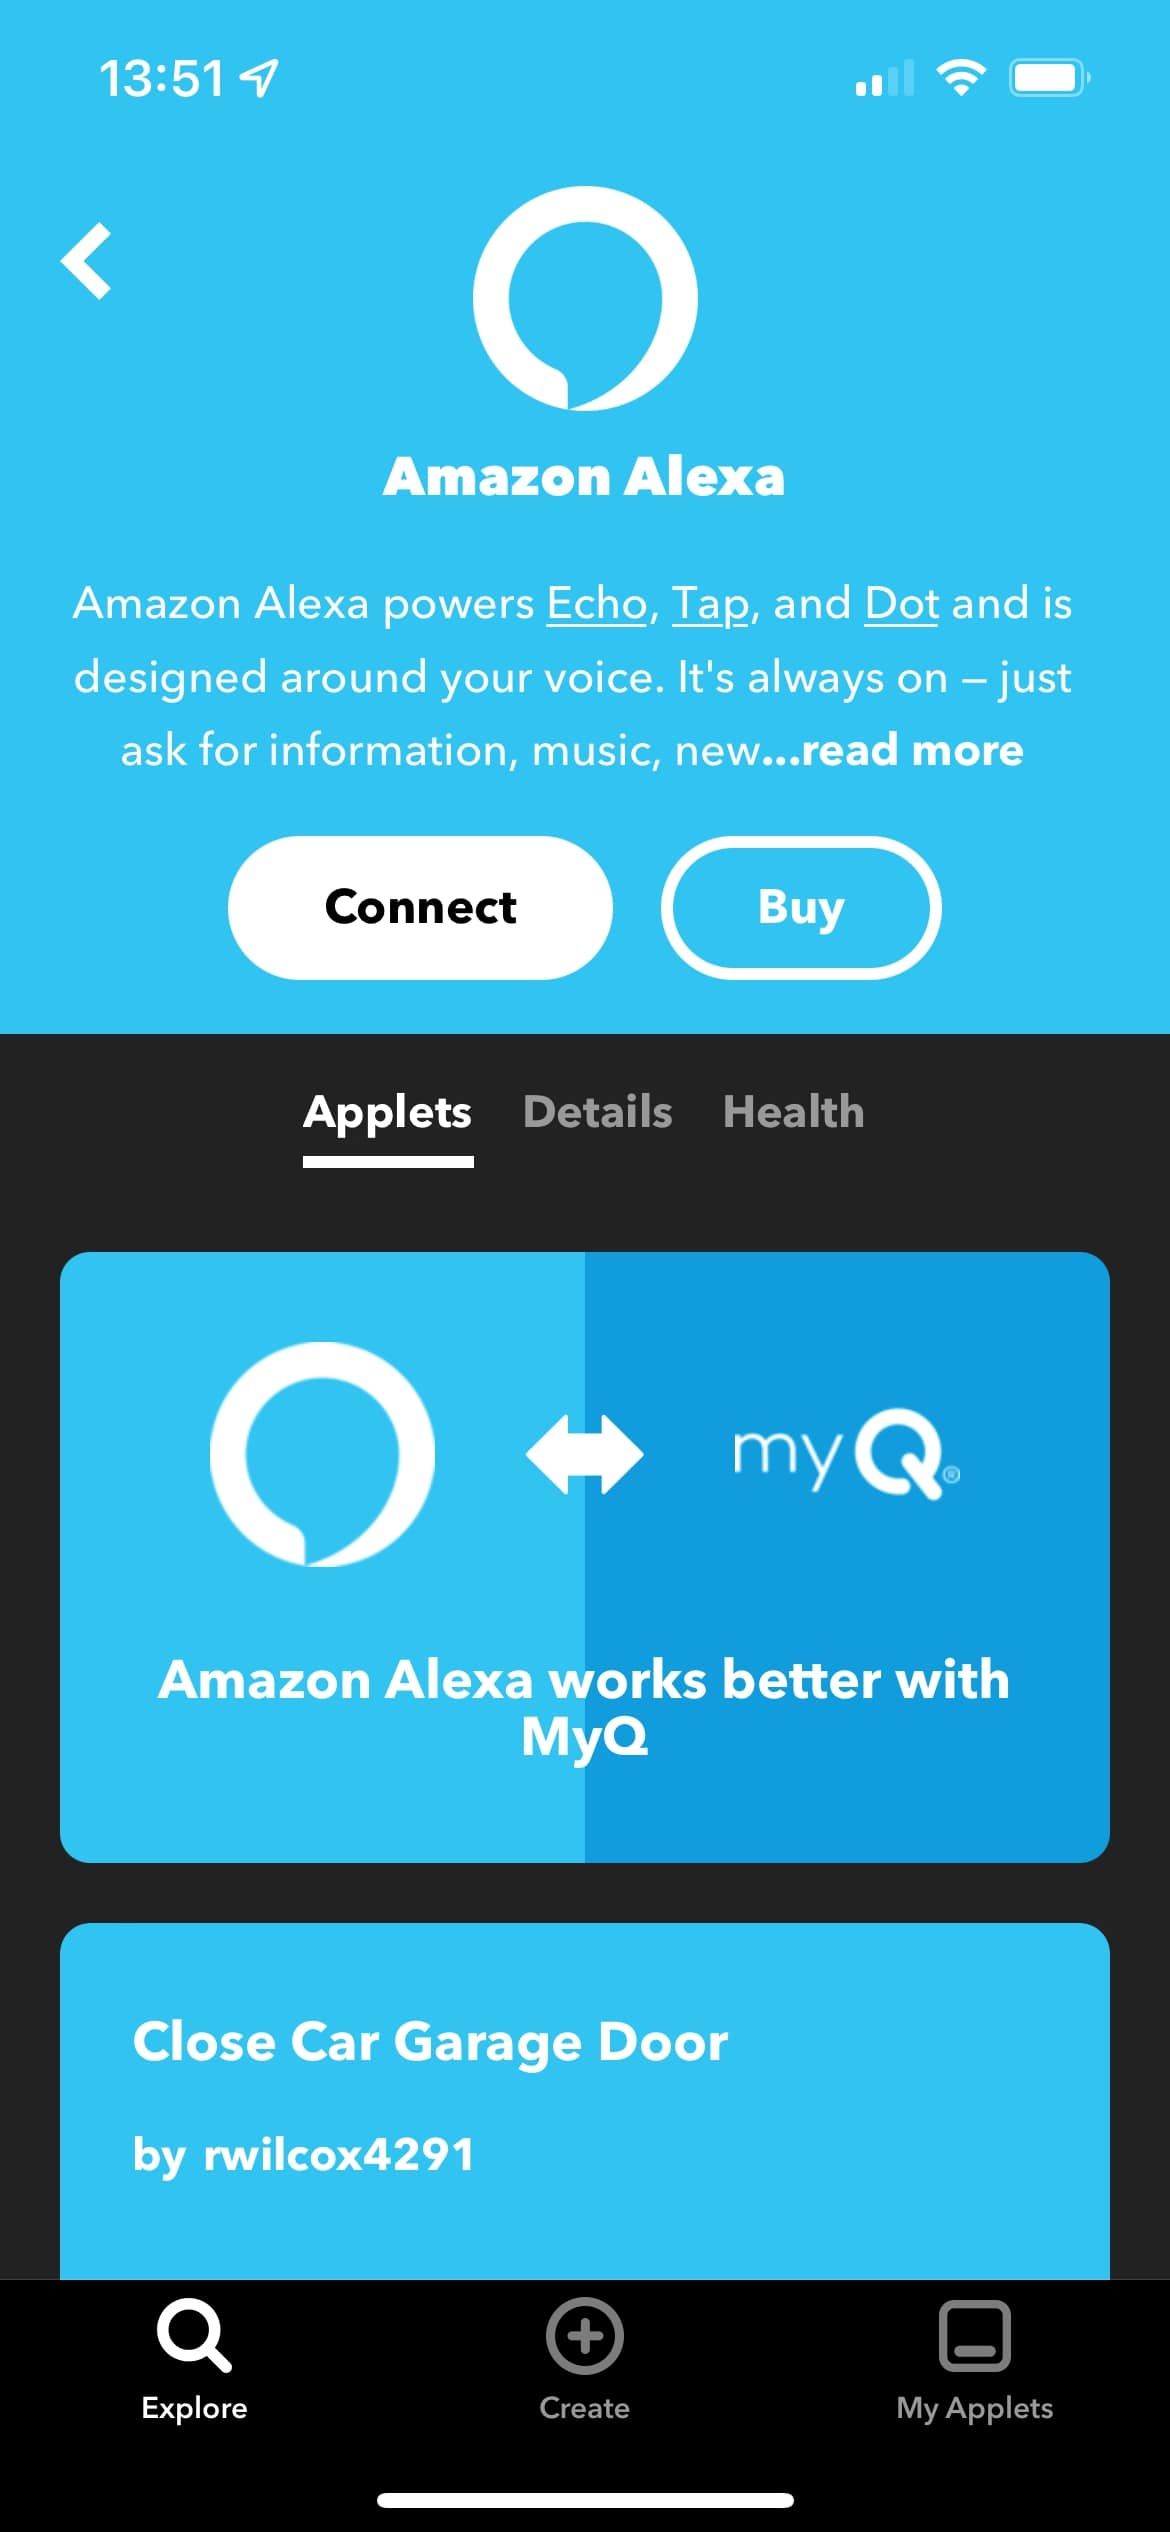 The main page for Amazon Alexa in the IFTTT app